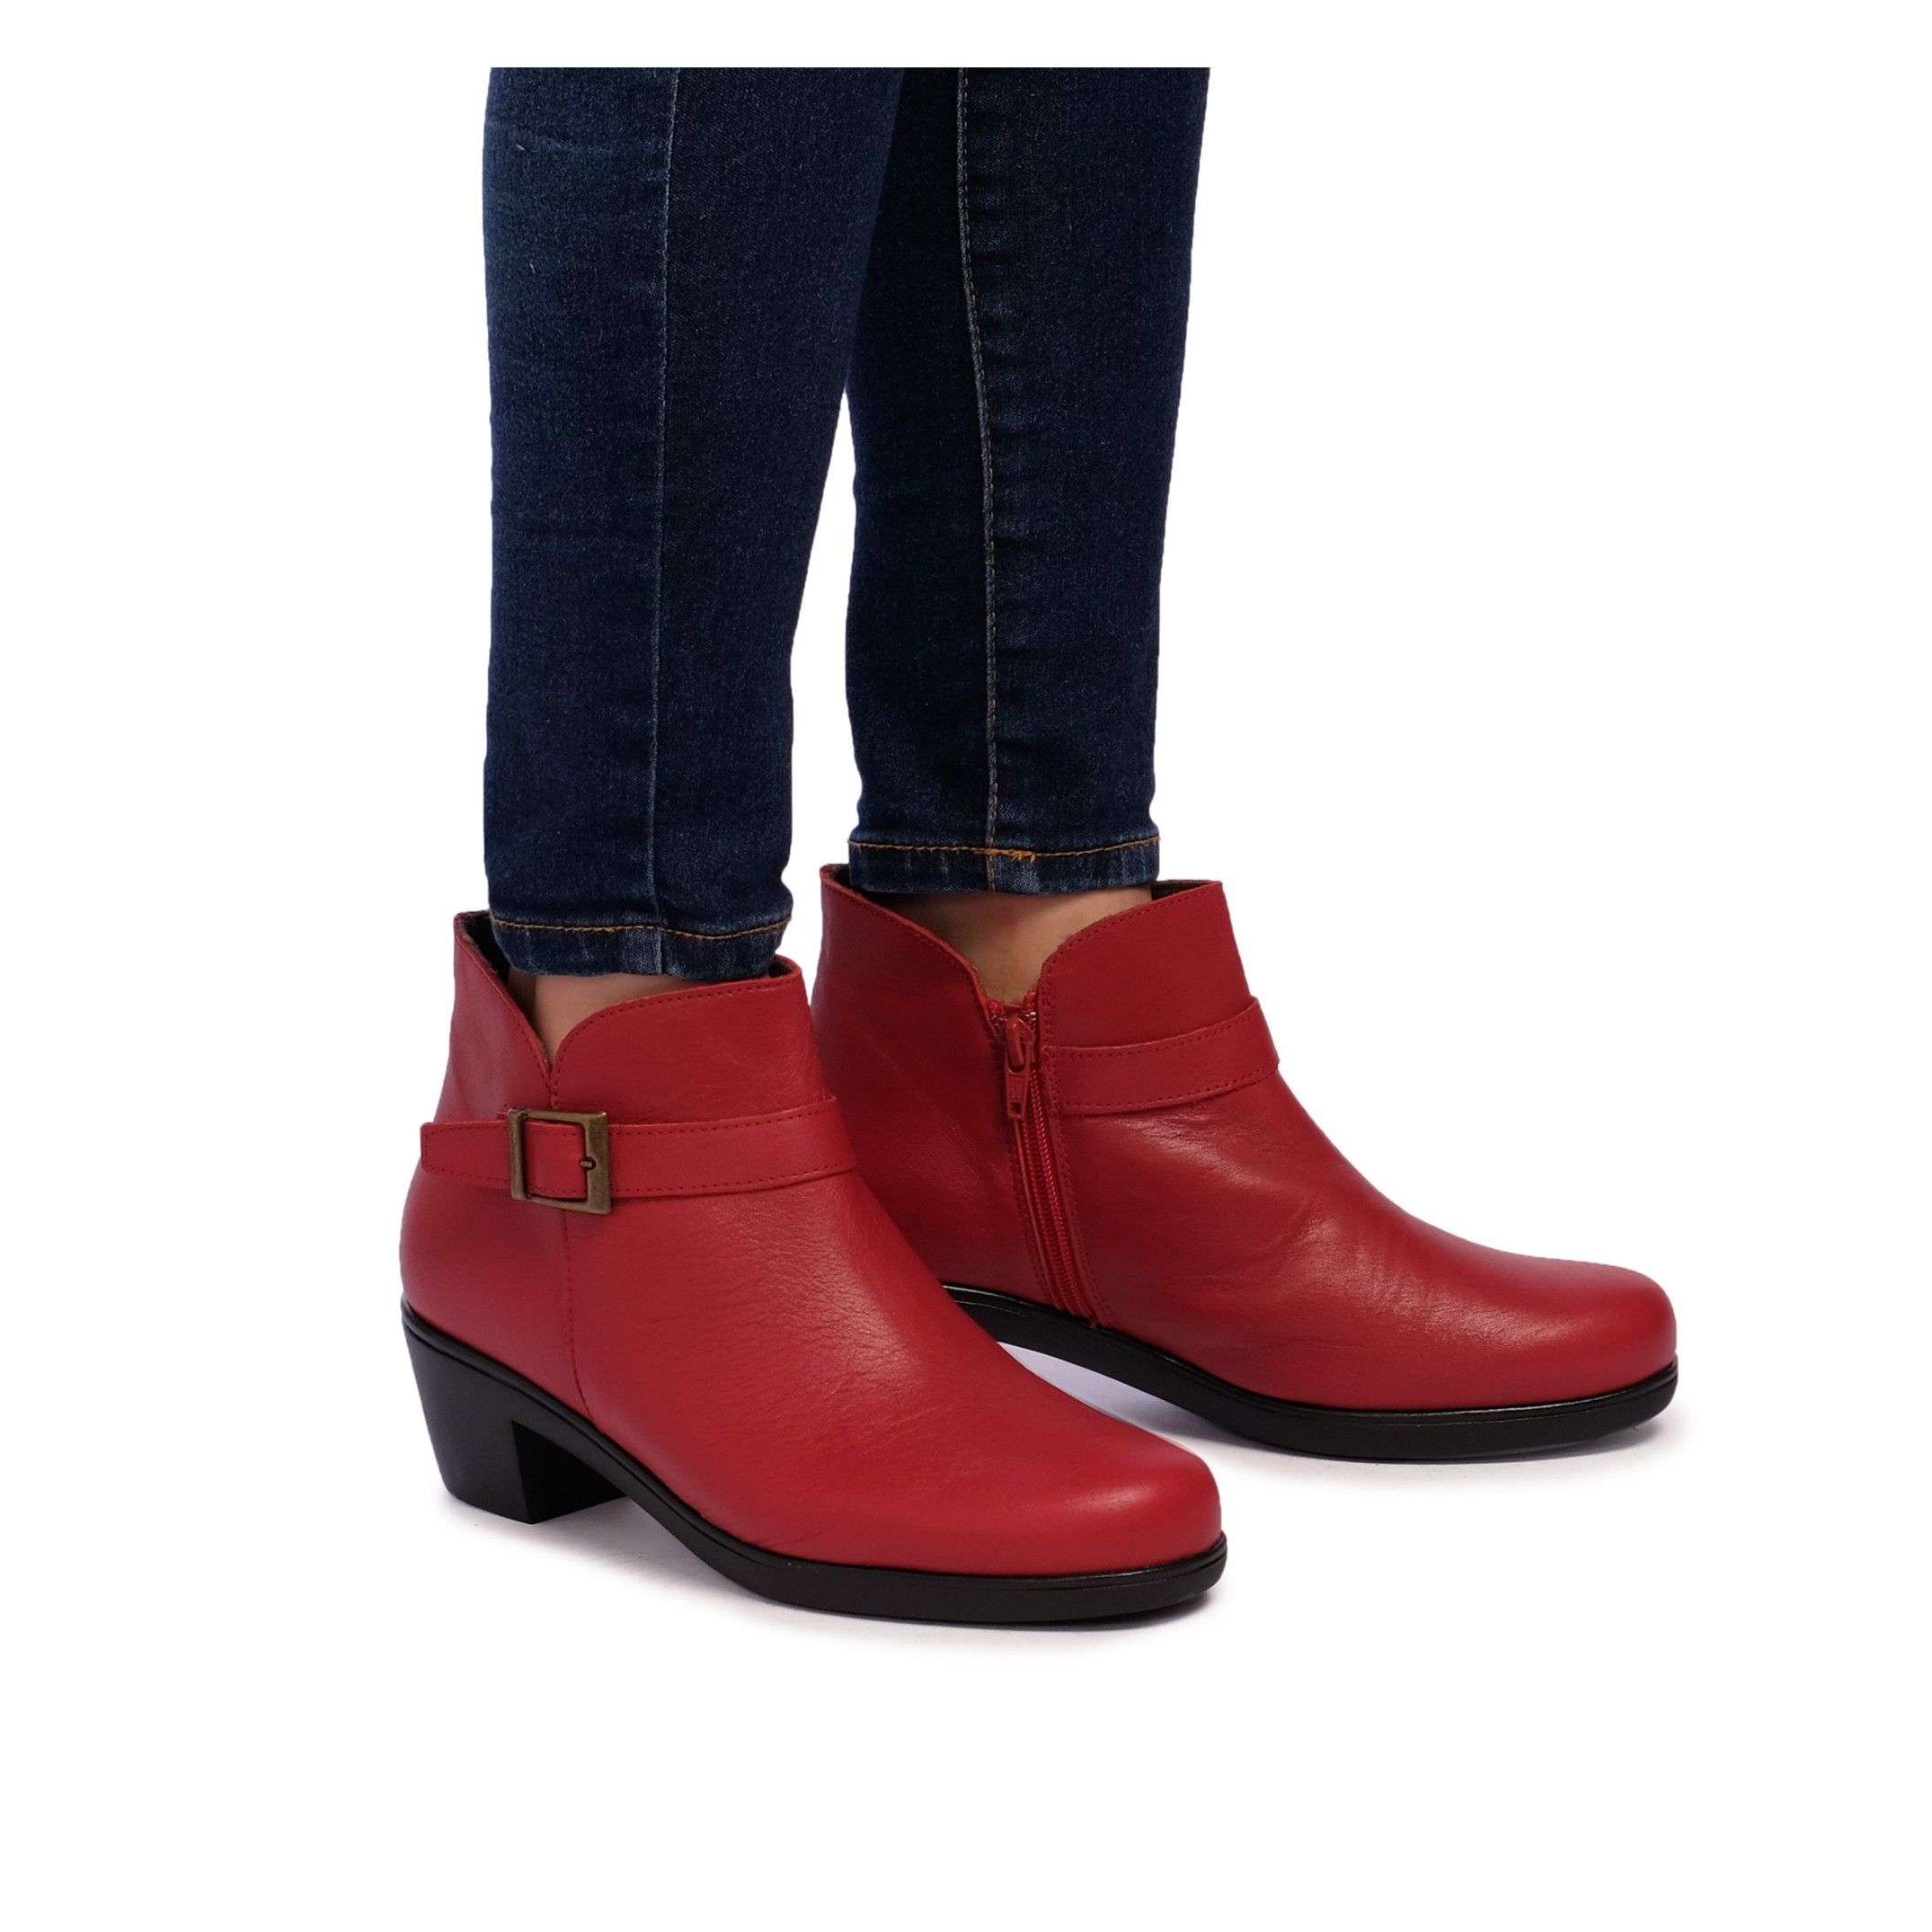 Leather ankle boots for women. Wedge and Zipper closure from inner. Insole made of leather. Upper made of leather. Inner made of textile. Platform: 1 cm. Heel: 5 cm. Made in Spain.